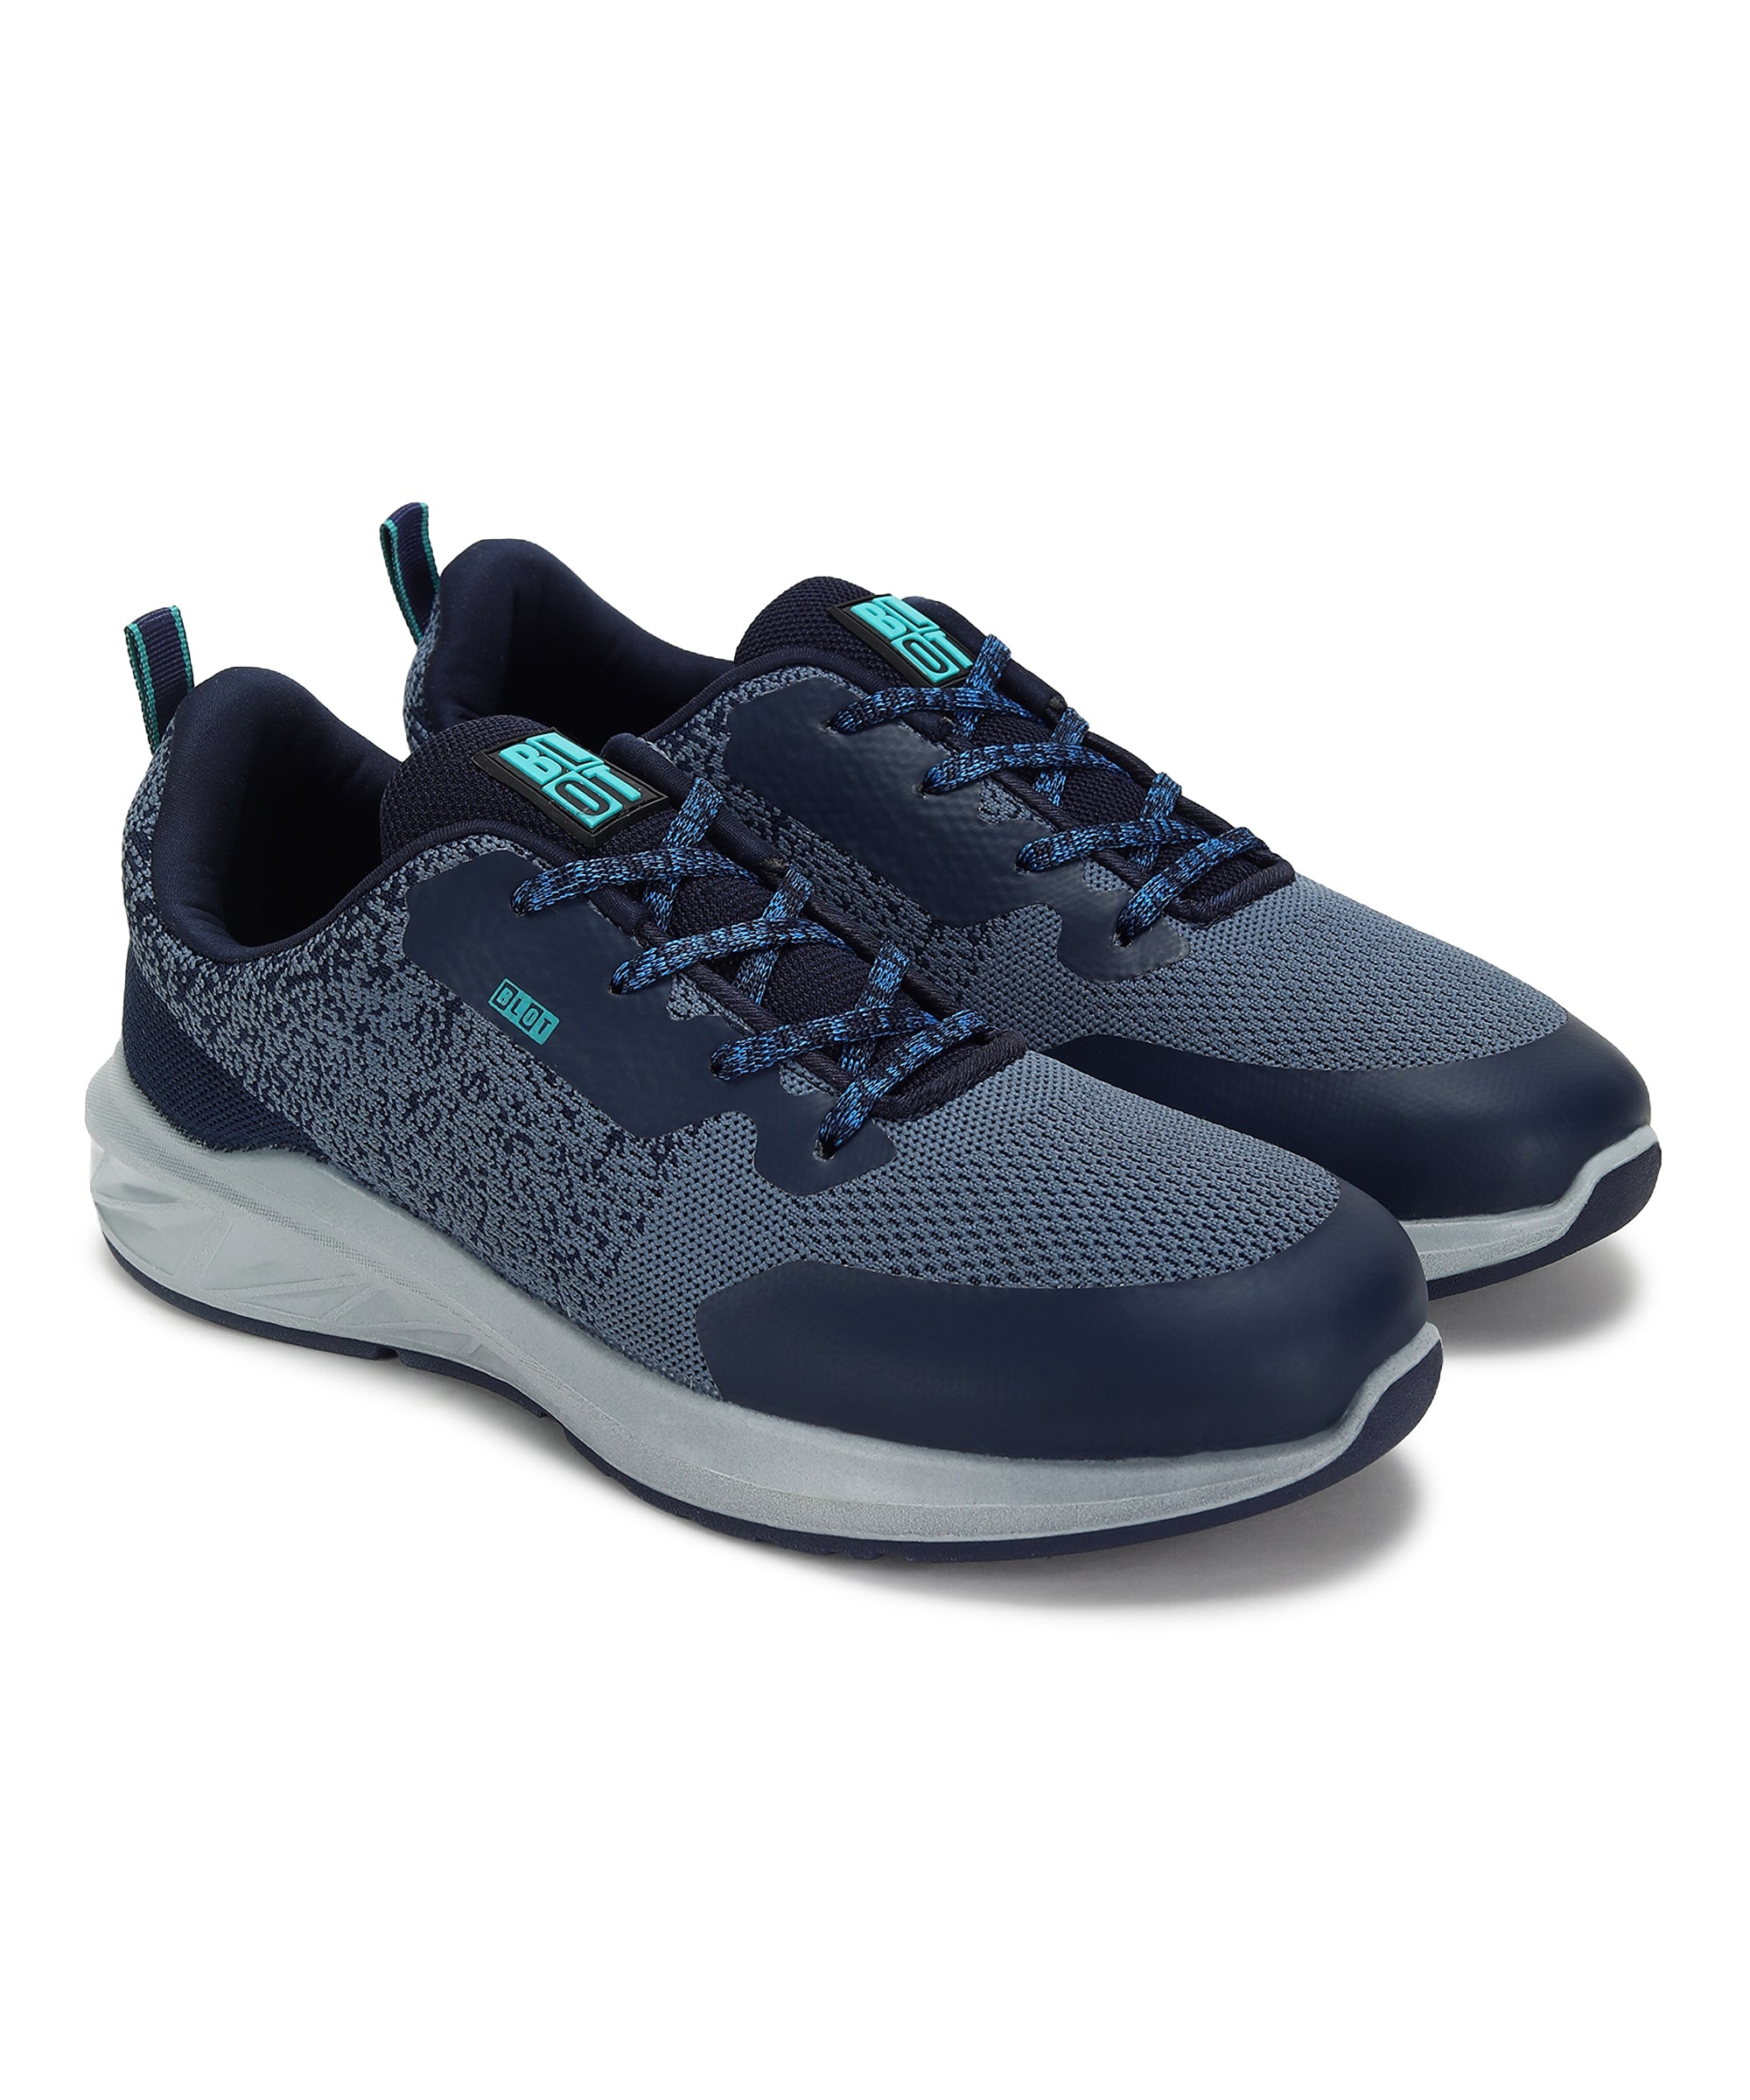 Paragon PUK3506GS Men Walking Shoes | Athletic Shoes with Comfortable Cushioned Sole for Daily Outdoor Use